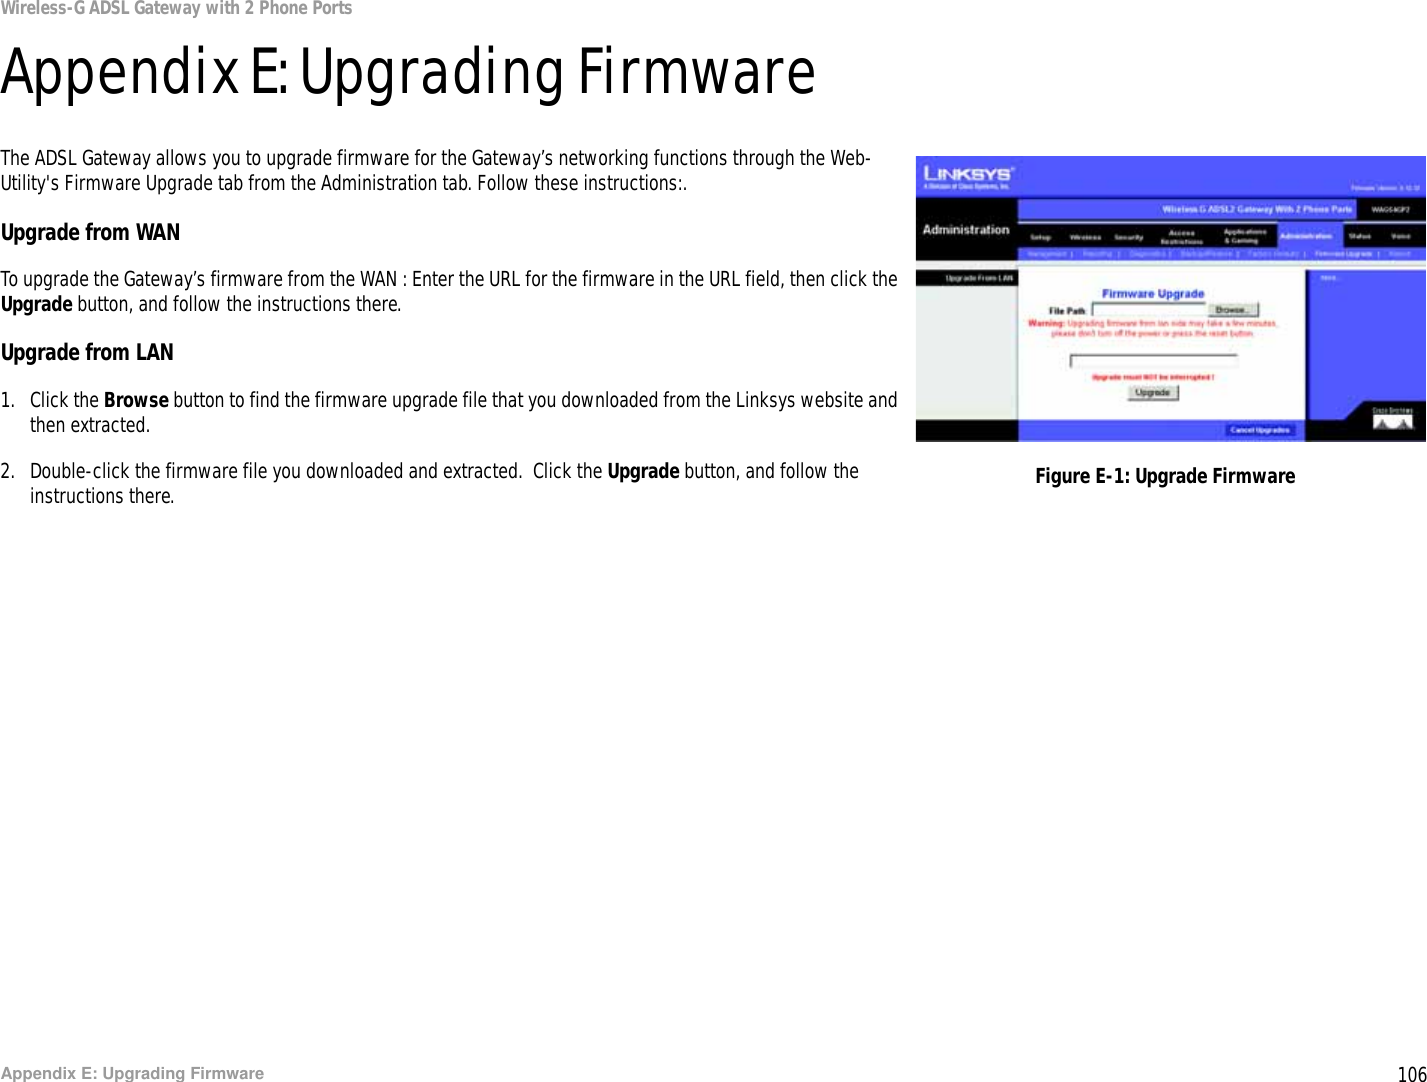 106Appendix E: Upgrading FirmwareWireless-G ADSL Gateway with 2 Phone PortsAppendix E: Upgrading FirmwareThe ADSL Gateway allows you to upgrade firmware for the Gateway’s networking functions through the Web-Utility&apos;s Firmware Upgrade tab from the Administration tab. Follow these instructions:.Upgrade from WANTo upgrade the Gateway’s firmware from the WAN : Enter the URL for the firmware in the URL field, then click the Upgrade button, and follow the instructions there.Upgrade from LAN1. Click the Browse button to find the firmware upgrade file that you downloaded from the Linksys website and then extracted.2. Double-click the firmware file you downloaded and extracted.  Click the Upgrade button, and follow the instructions there. Figure E-1: Upgrade Firmware